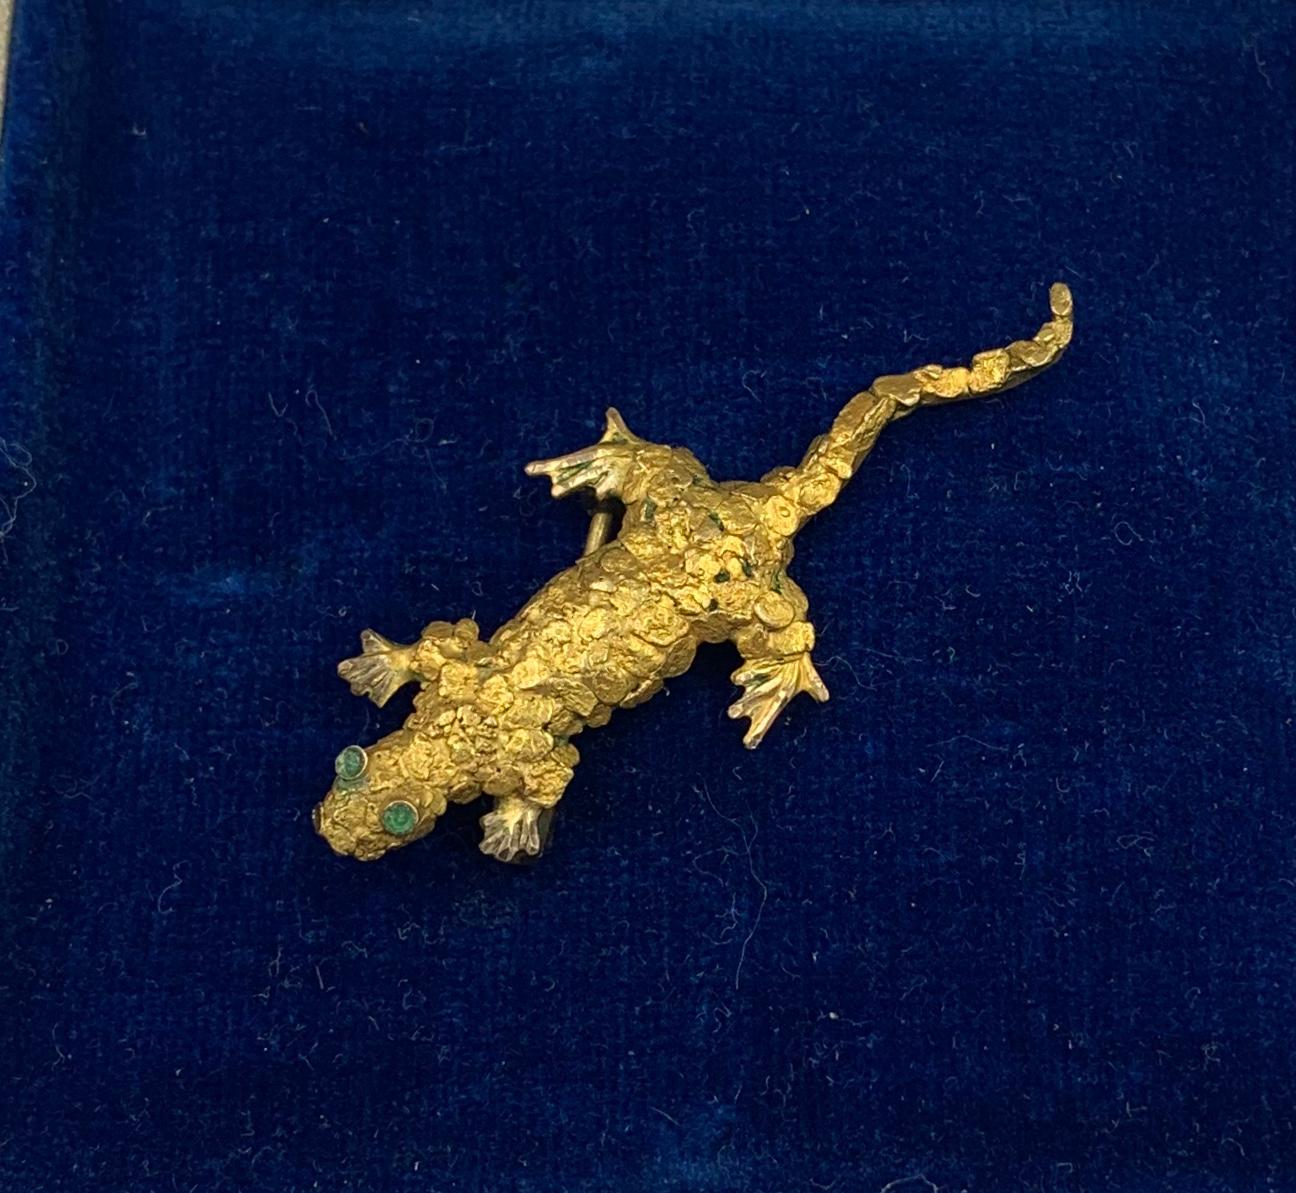 An adorable Lizard, Gecko Retro Mid-Century Modern Brooch Pin with Emerald eyes in 10 Karat Nugget Gold.  The wonderful lizard is made of nuggets of 10 Karat Yellow Gold.  The lizard has sparkling Emerald eyes.  The lizard has superb Mid-Century